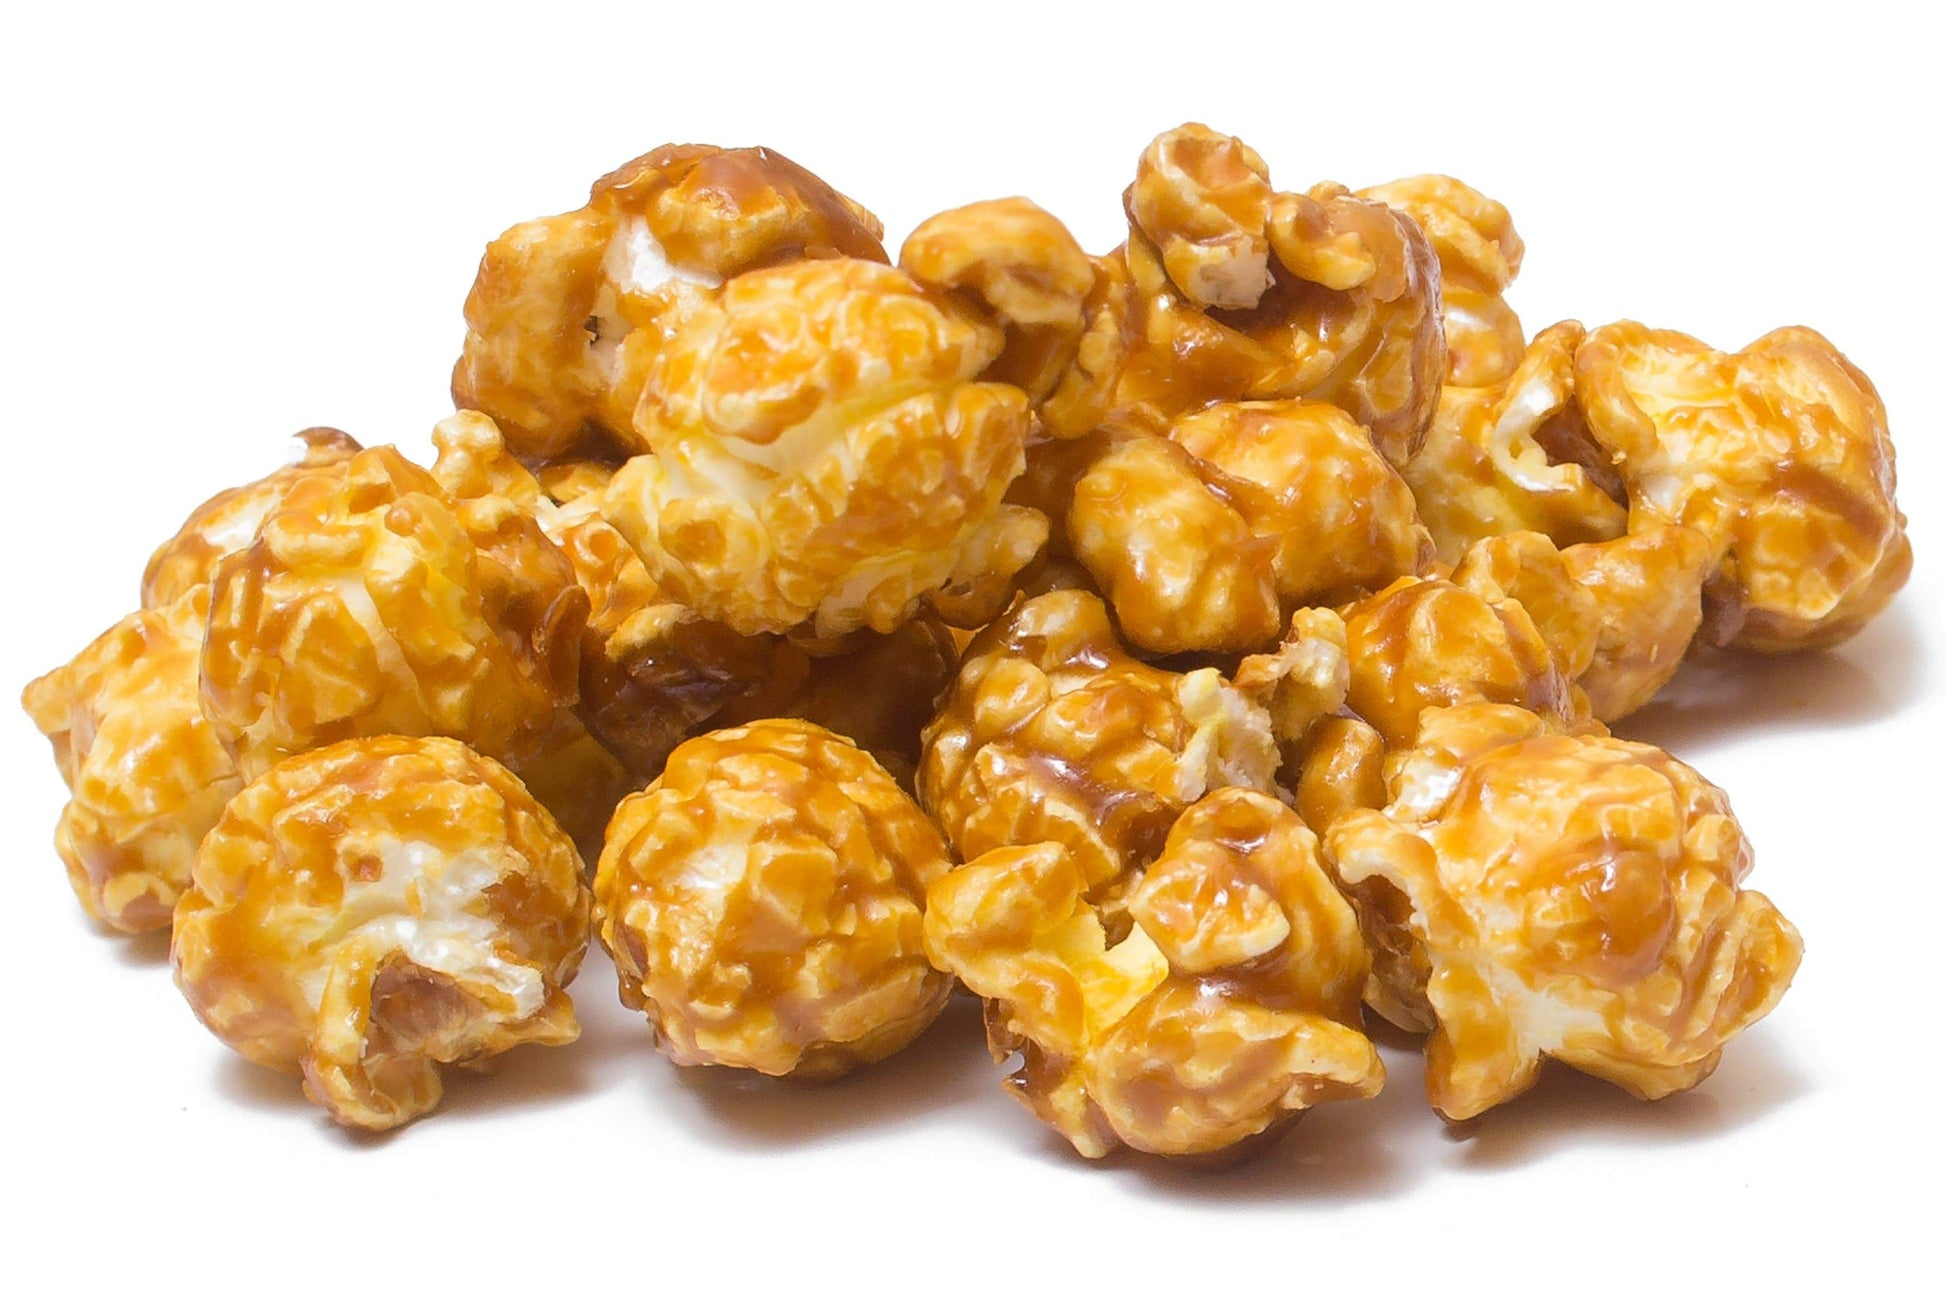 POPPED LAS VEGAS Indulge in Exquisite Gourmet Caramel Corn - Handcrafted Perfection! Made with Premium Ingredients, our Irresistible Caramel Corn is a Taste Sensation. Elevate Snack Time with our Decadent Gourmet Treat - Perfect for Any Occasion. Discover the Ultimate Blend of Sweetness and Crunch. Order Now for a Delightful Snacking Experience!